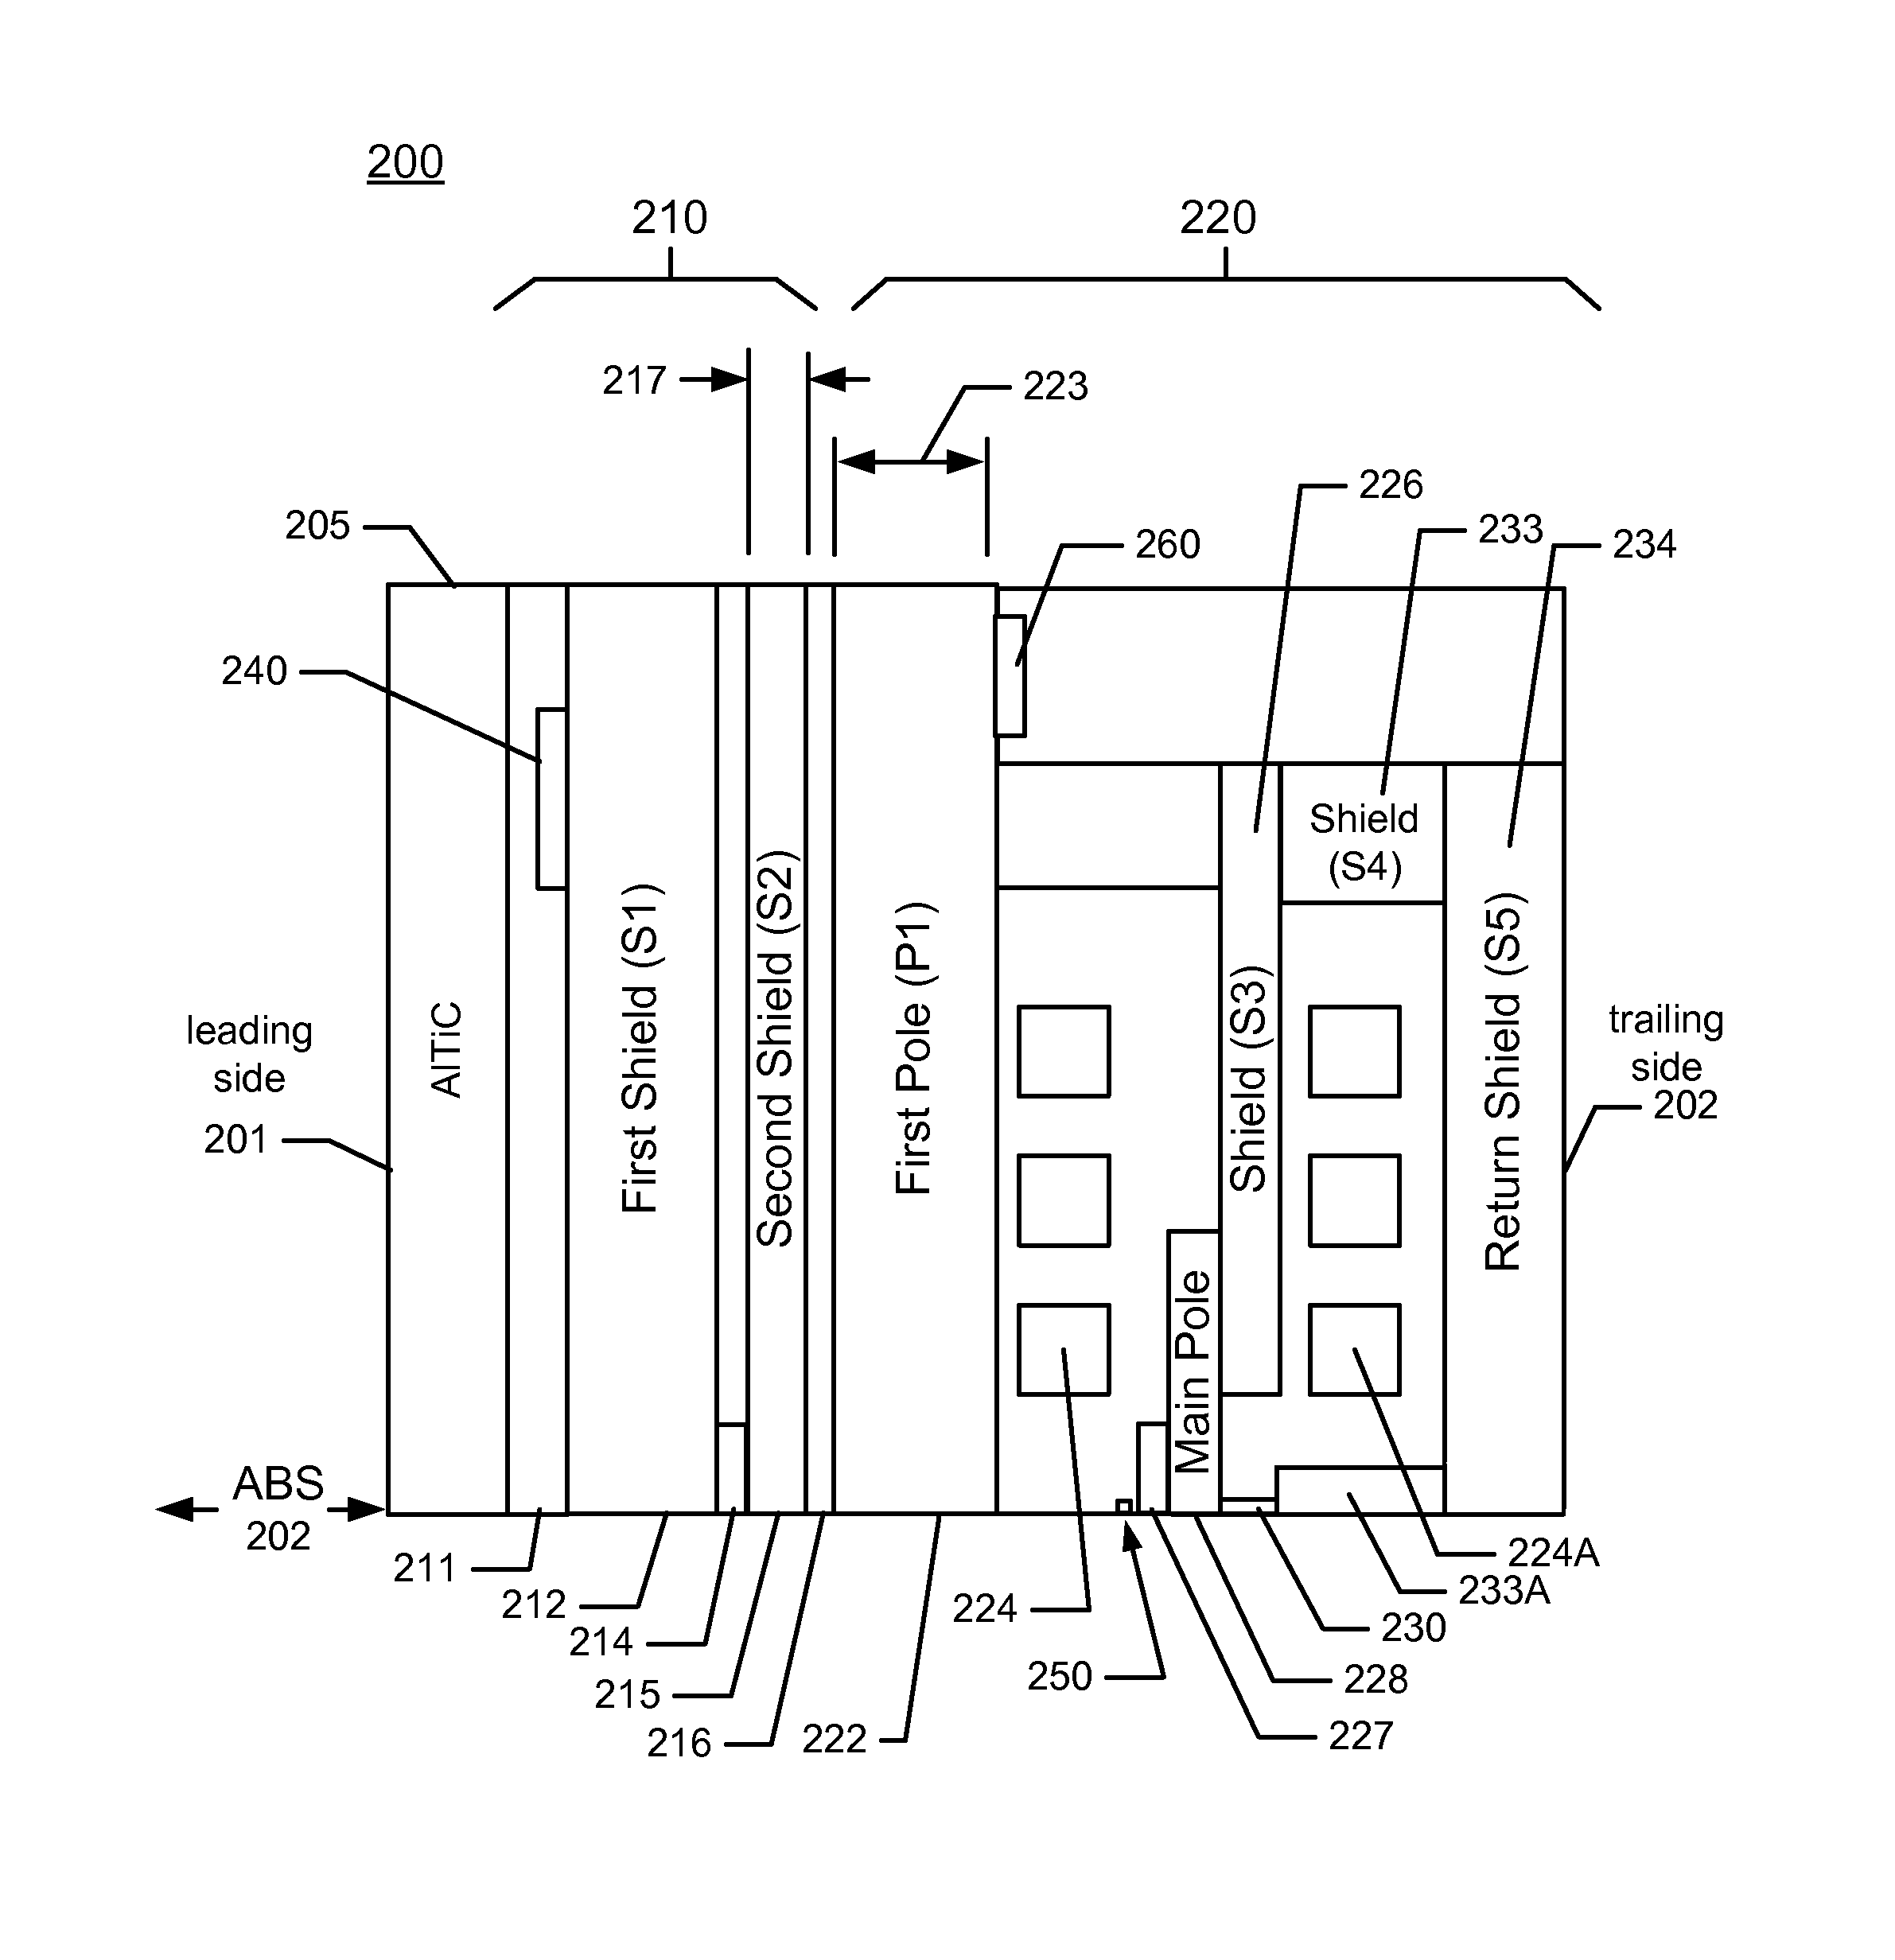 Magnetic recording head with dynamic fly height heating and having thermally controlled pole tip protrusion to control and protect reader element